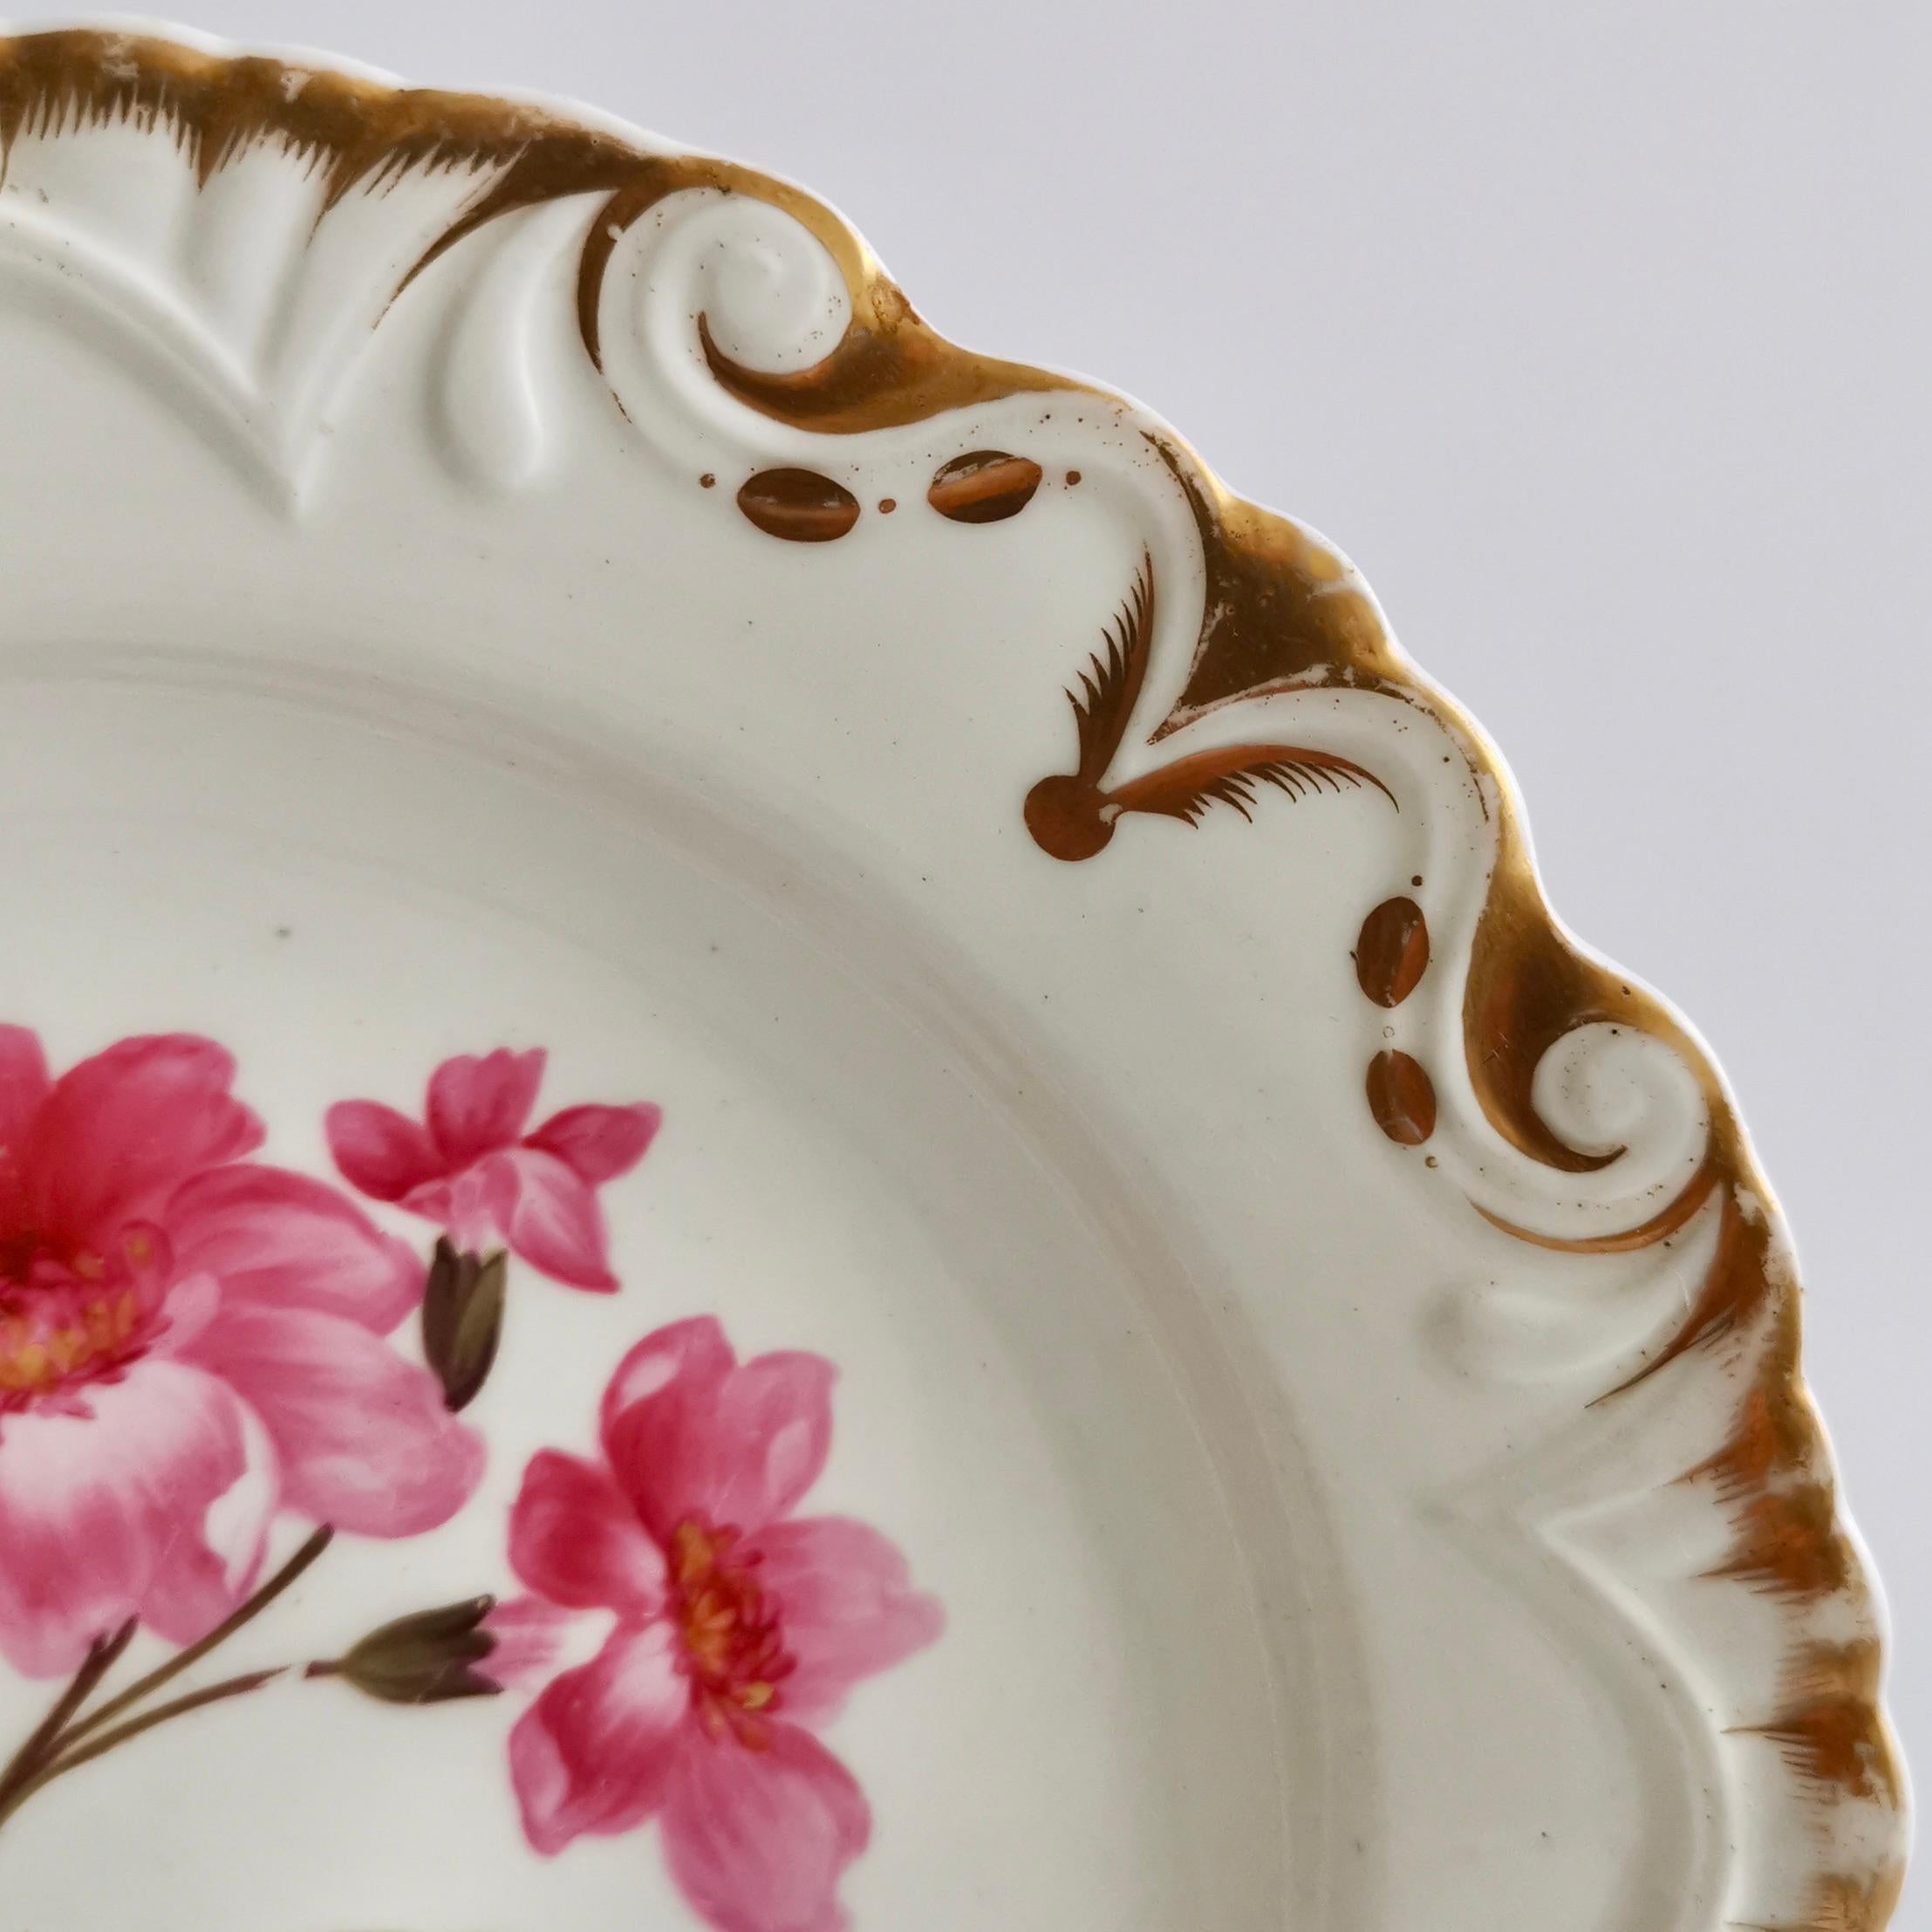 Early 19th Century Machin Porcelain Plate, White, Moustache Shape with Pink Flower, Regency